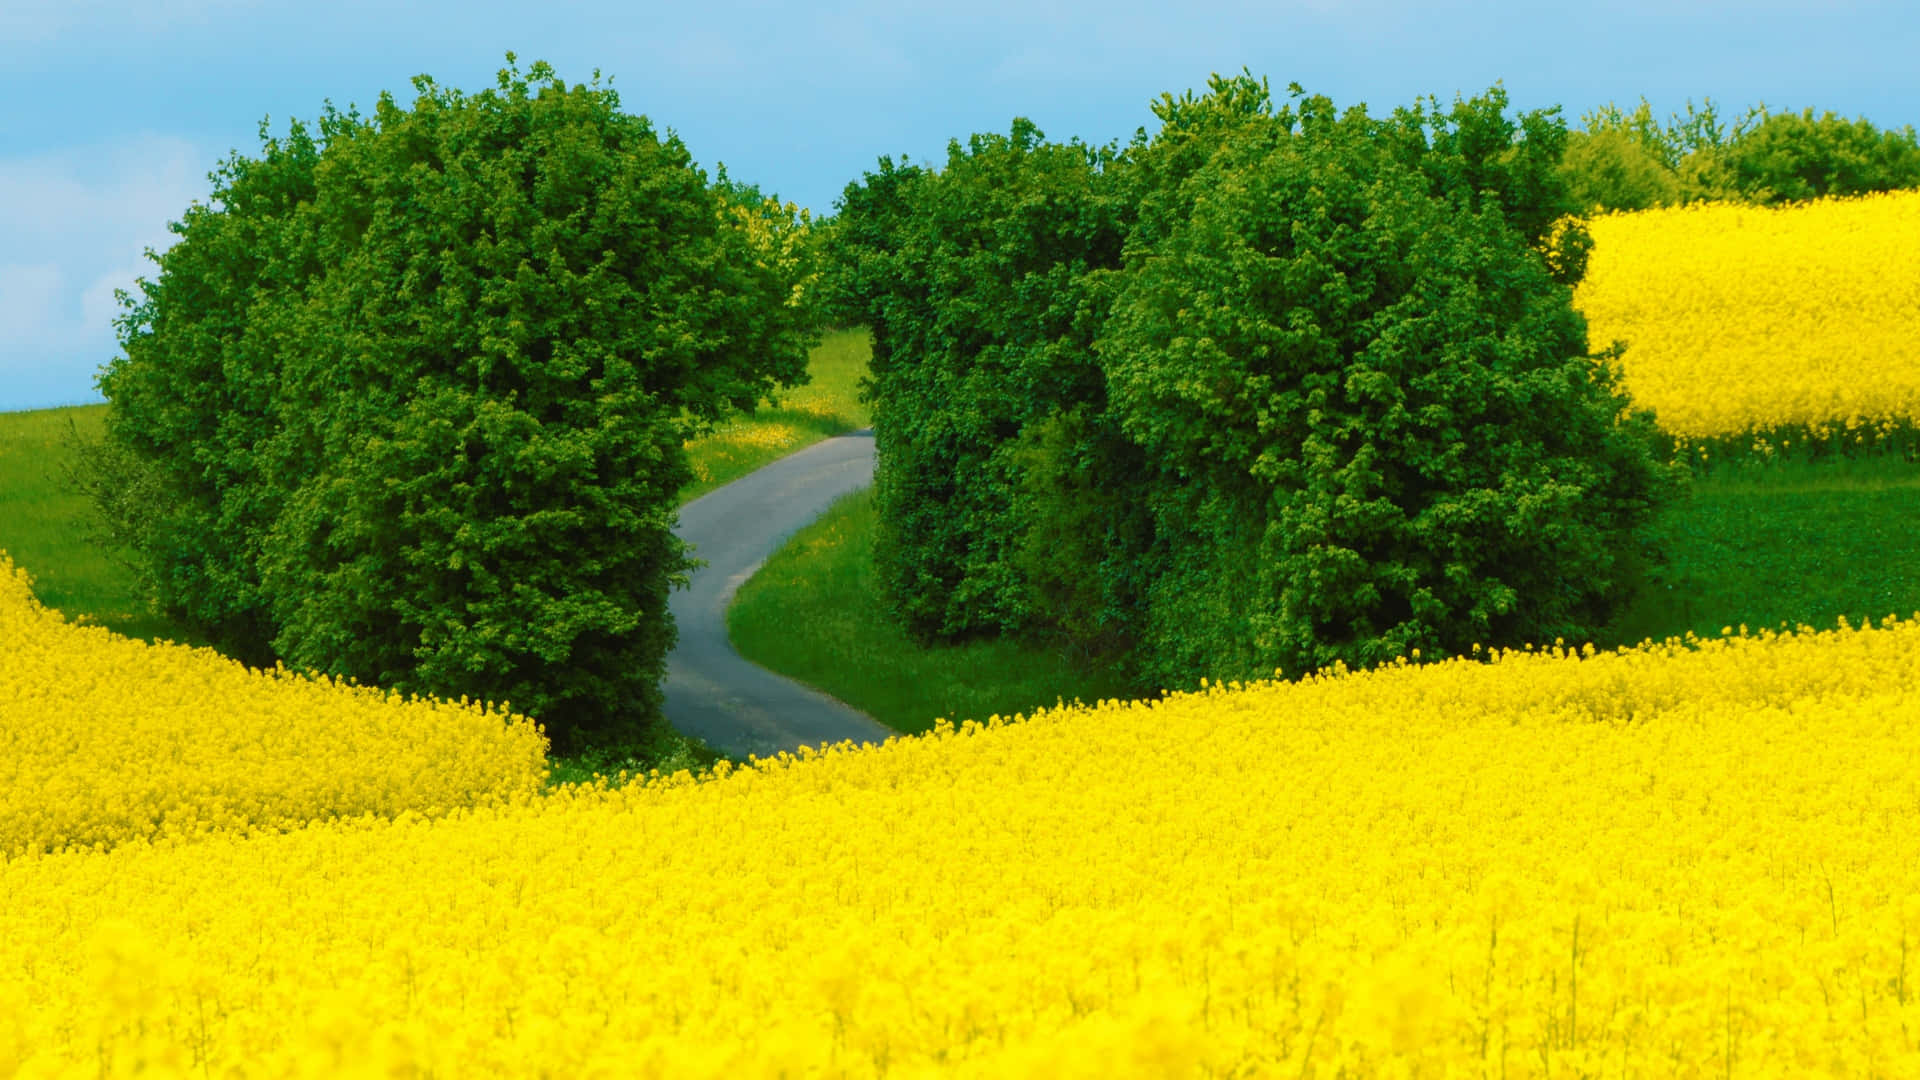 A Yellow Field With Trees And A Road